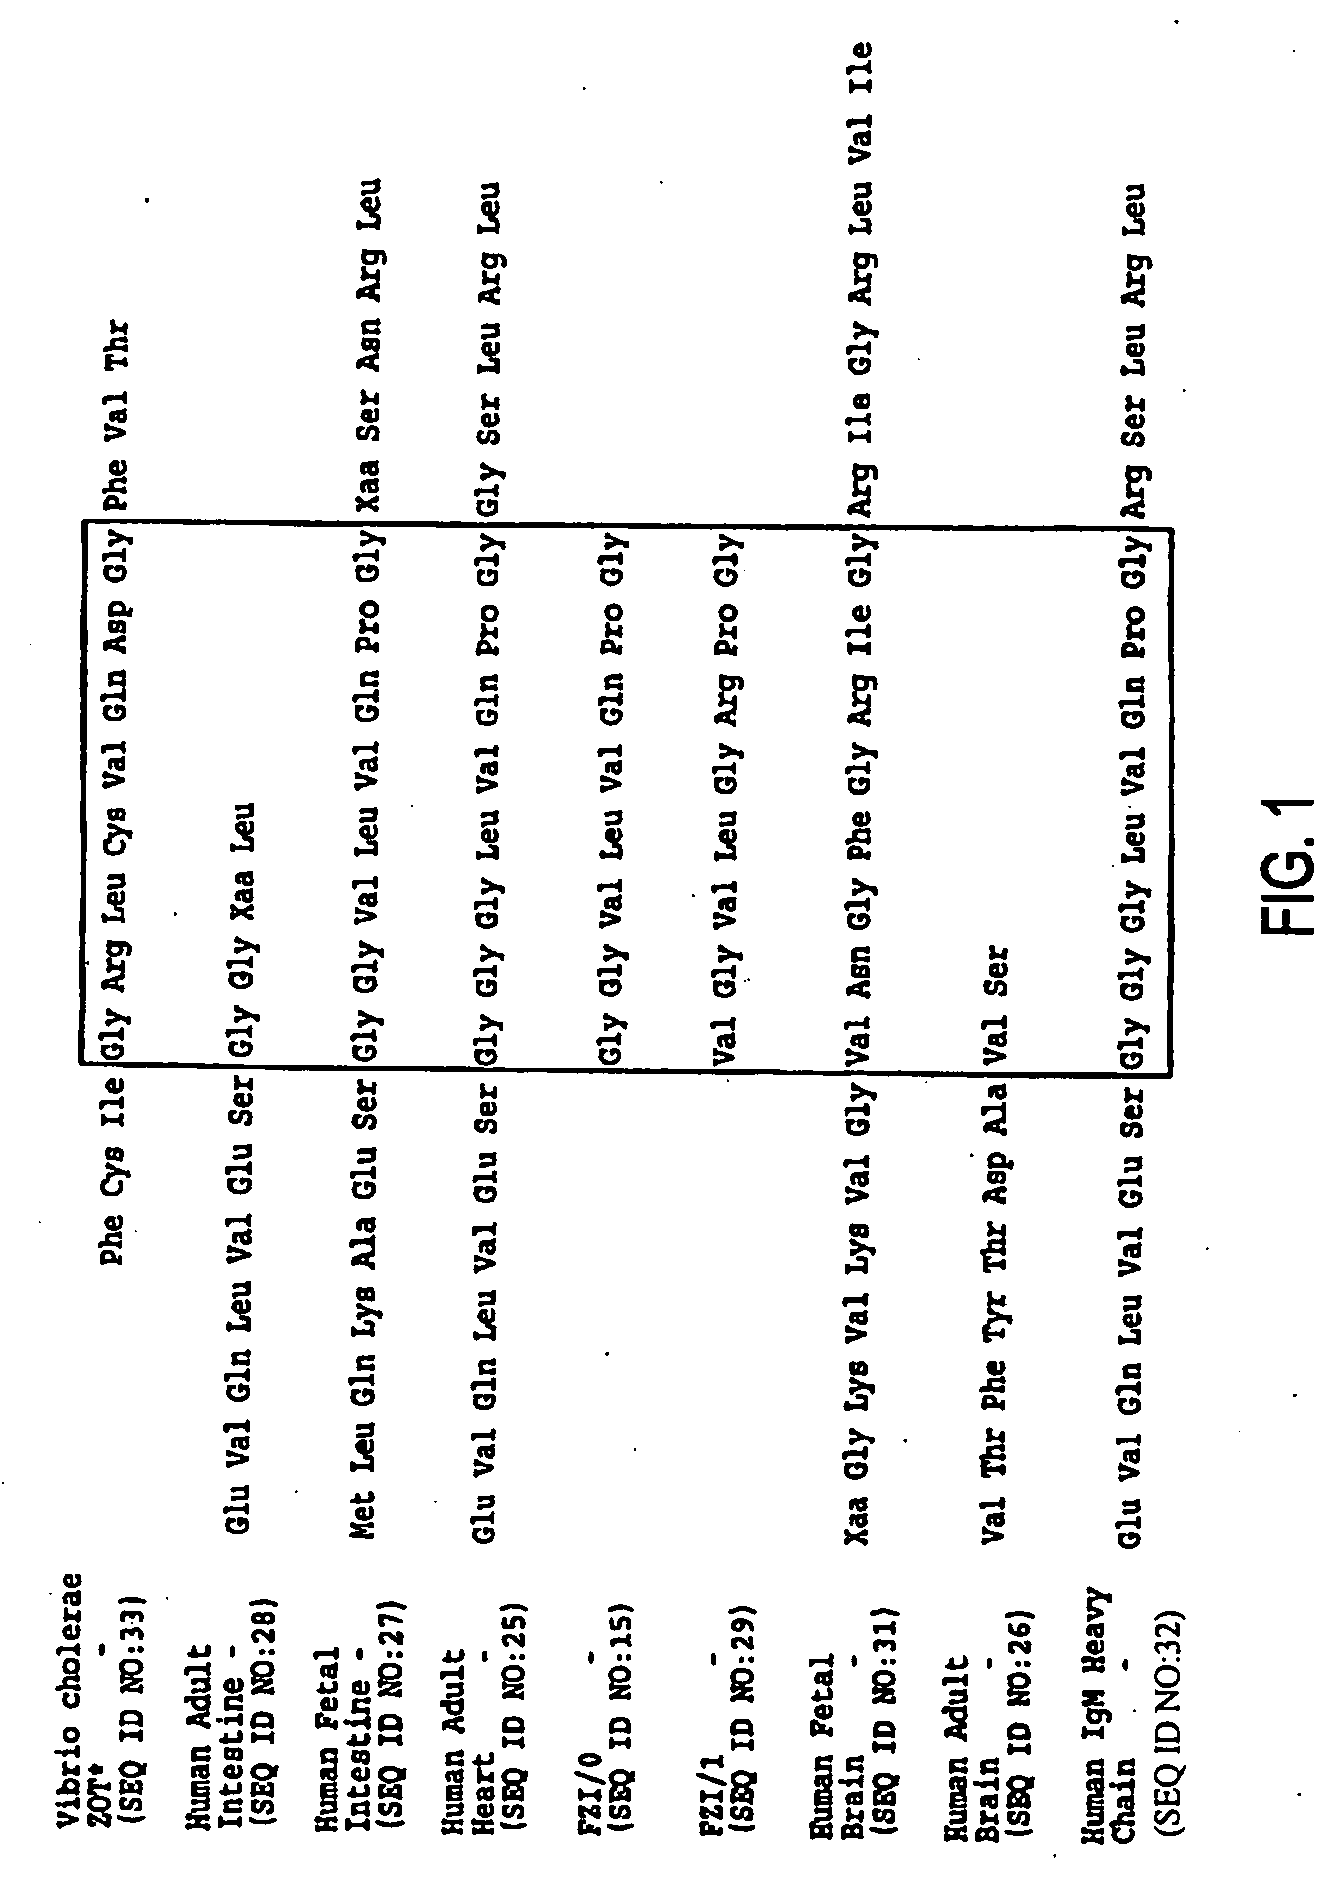 Method of use of antagonists of zonulin to prevent the loss of or to regenerate pancreatic cells